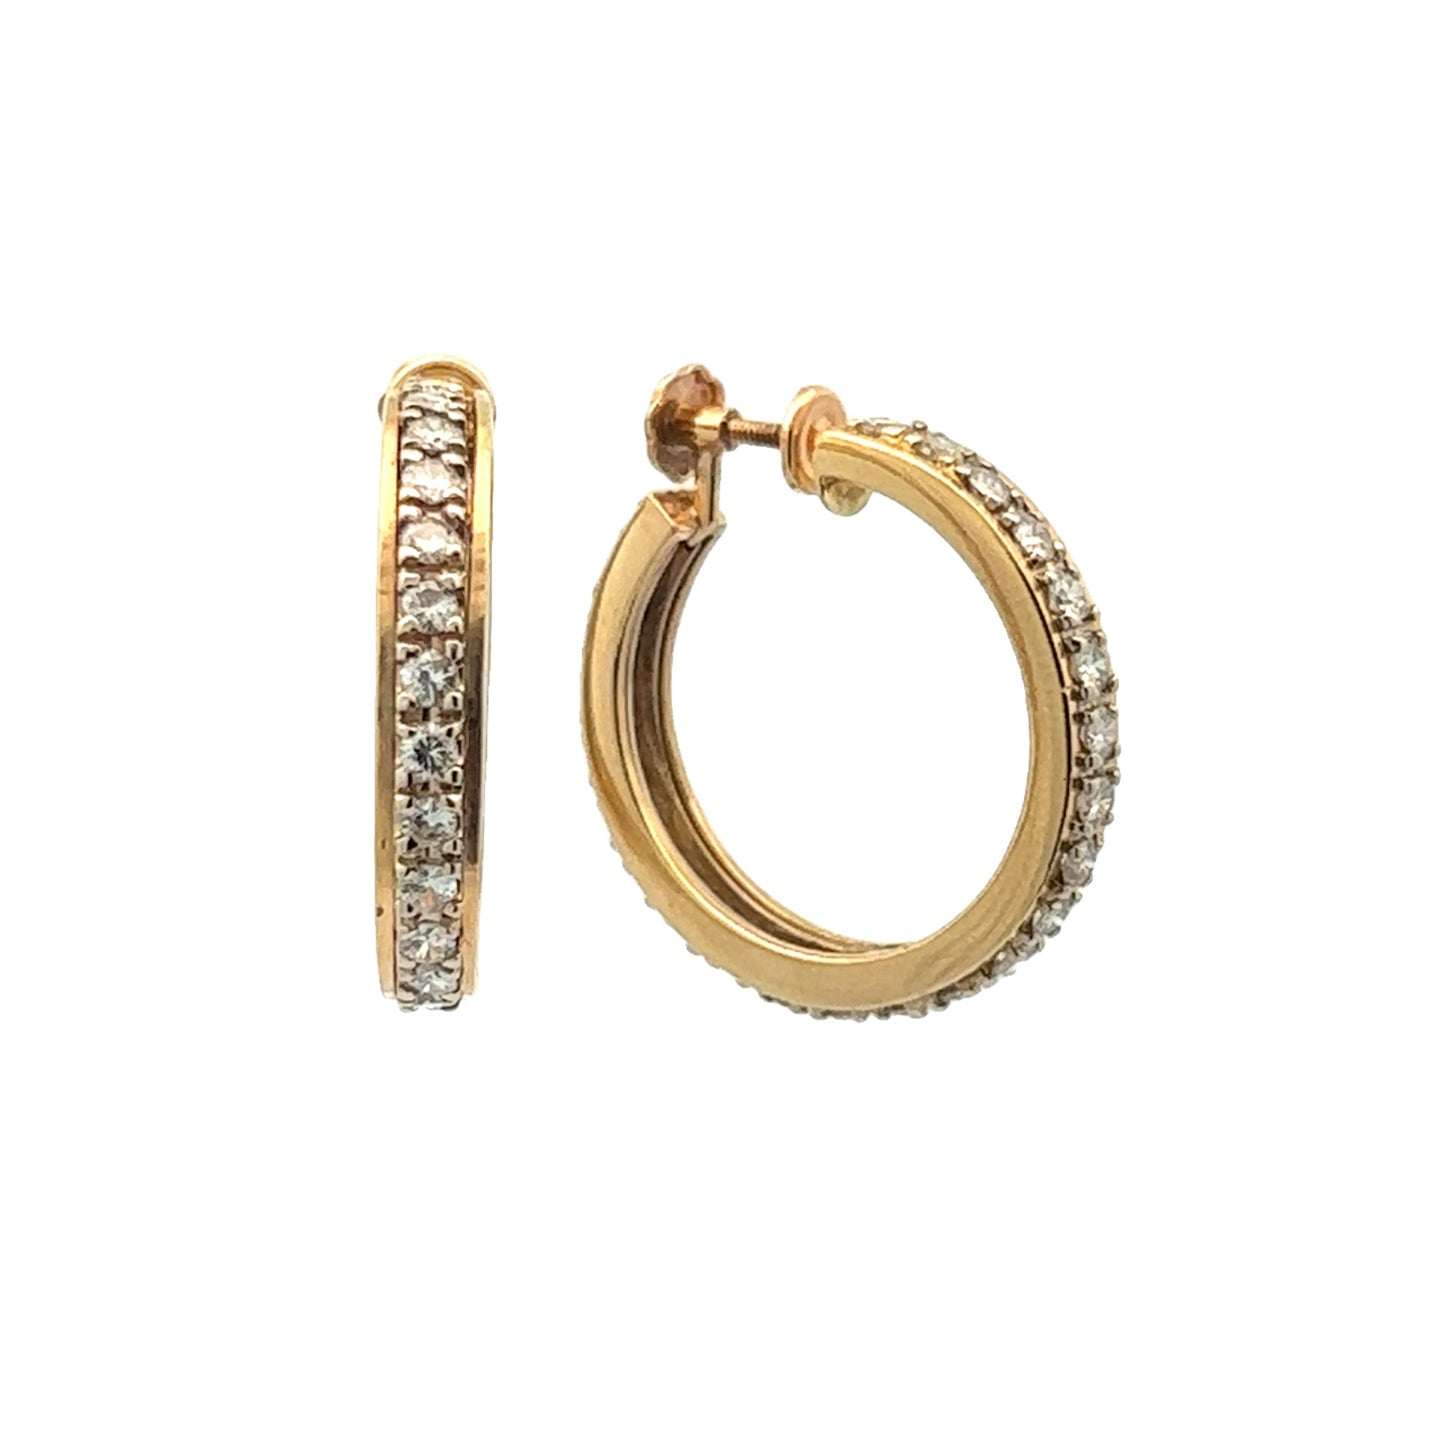 1970s 14KT Yellow Gold Diamond Hoop Earrings front and side view